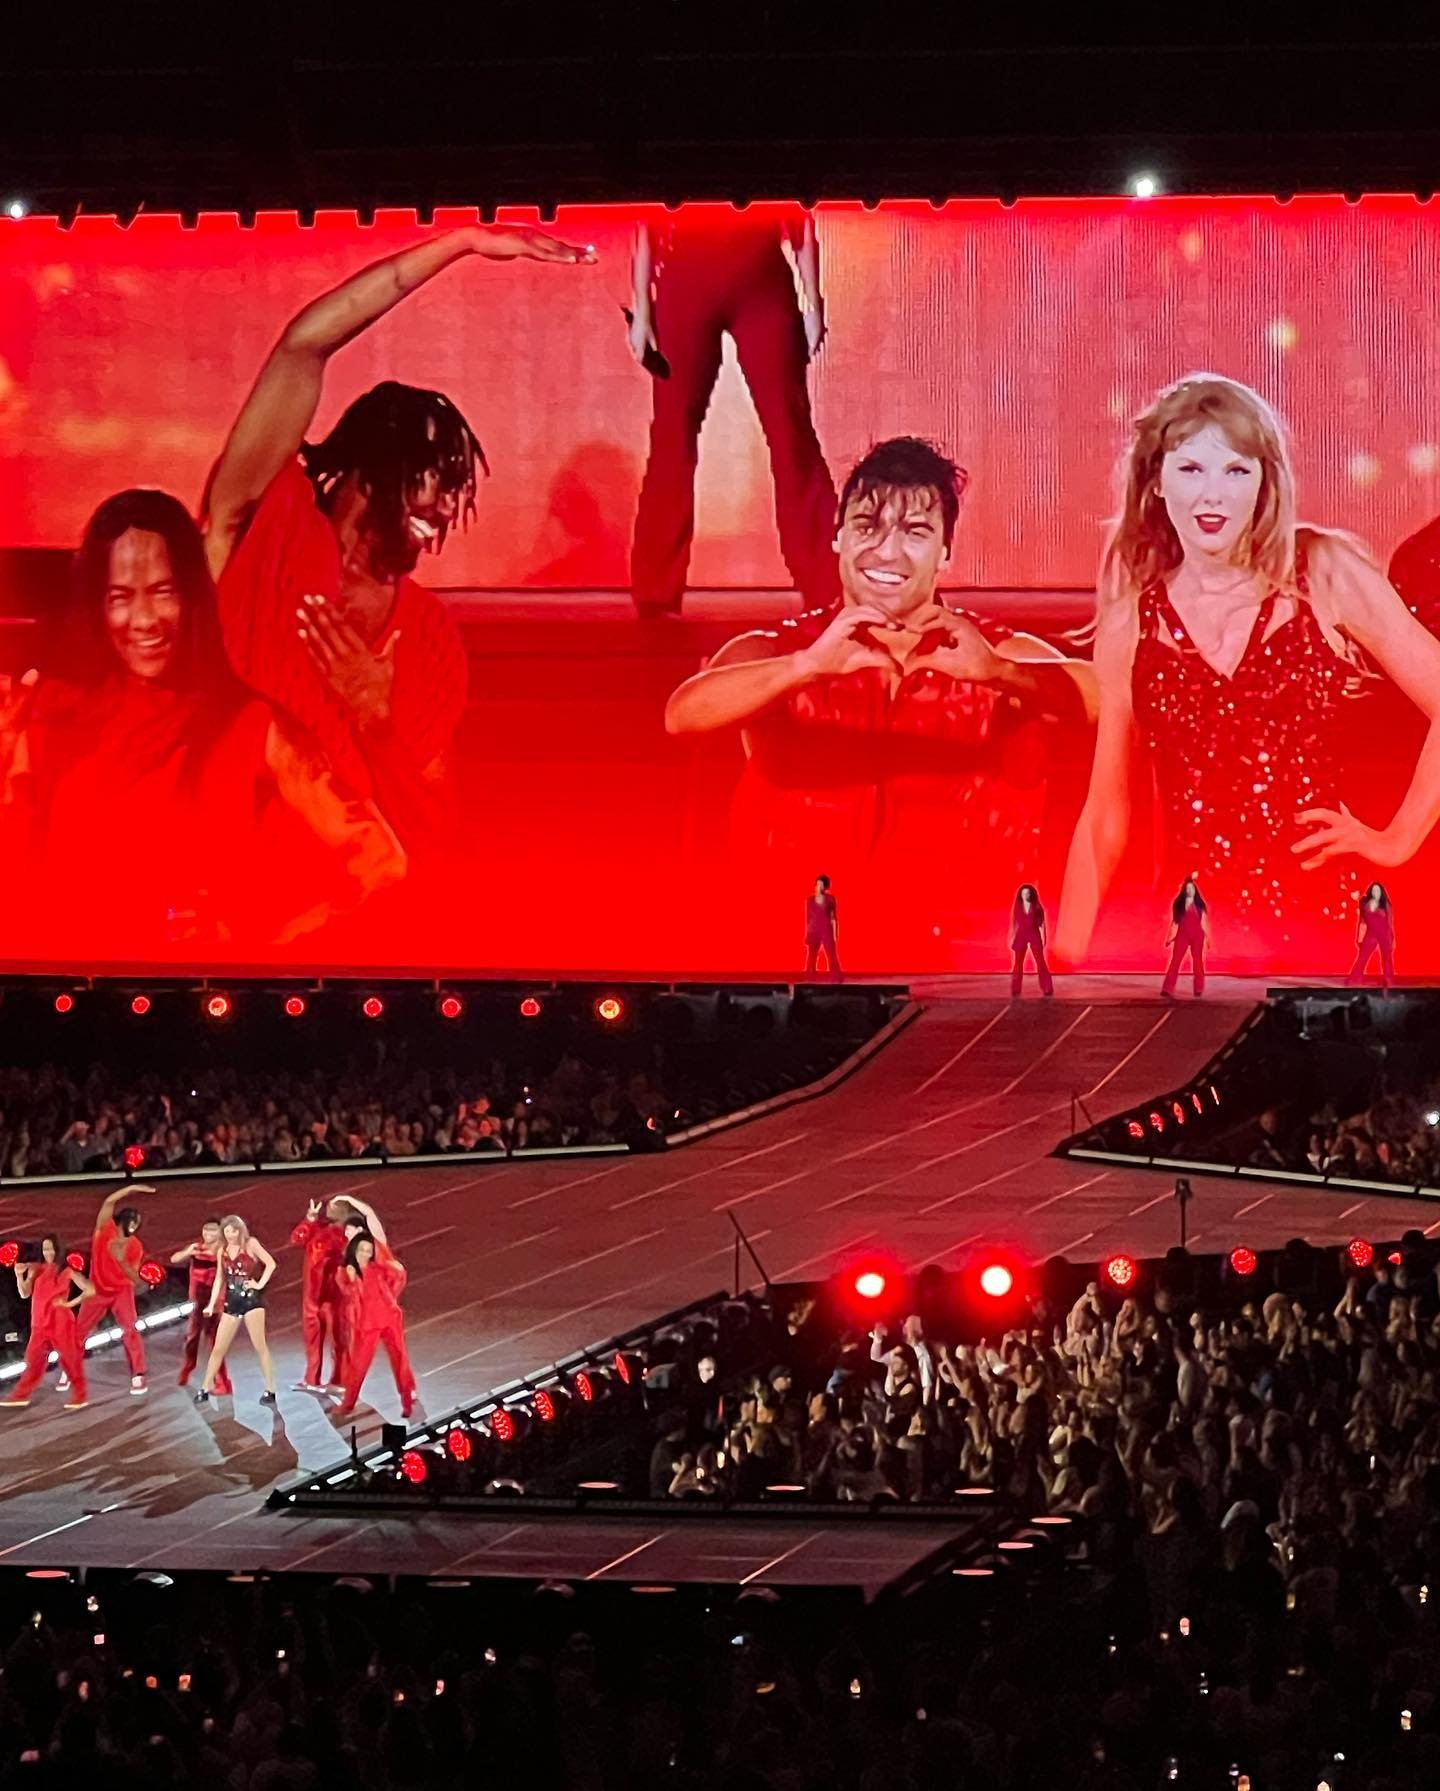 Ran it back &amp; got to see @taylorswift again. Such incredible show. Always so cool getting to see one of my all time favorites live. @sofistadium was electric! The most fun crowd!! It was the most fun party!!

@kassidyjane &amp; I made friendship 